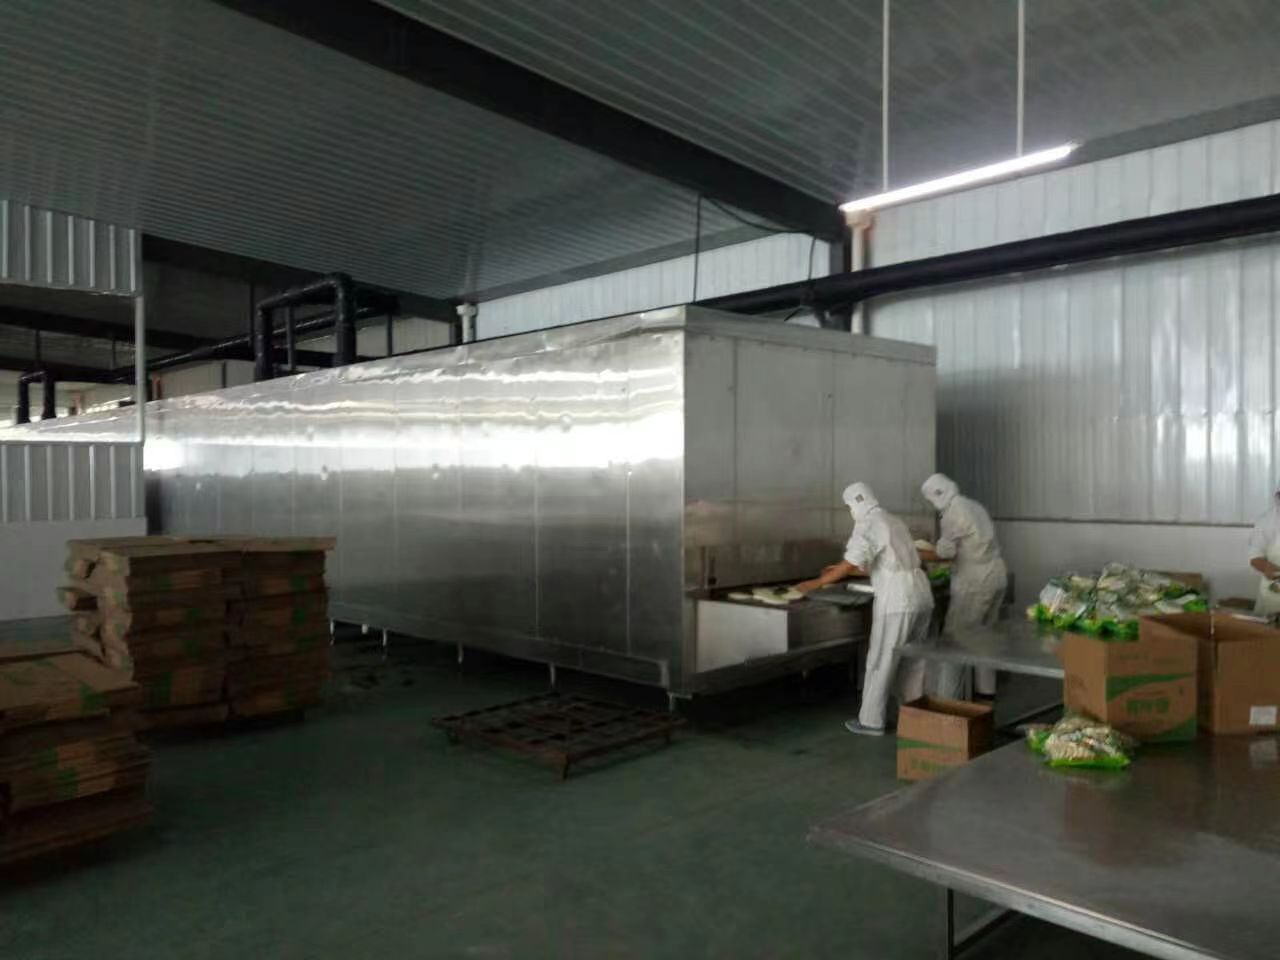 China High Quality FYW1500 Tunnel Cooler Process for Avocadoes Jam 1500KG/H 